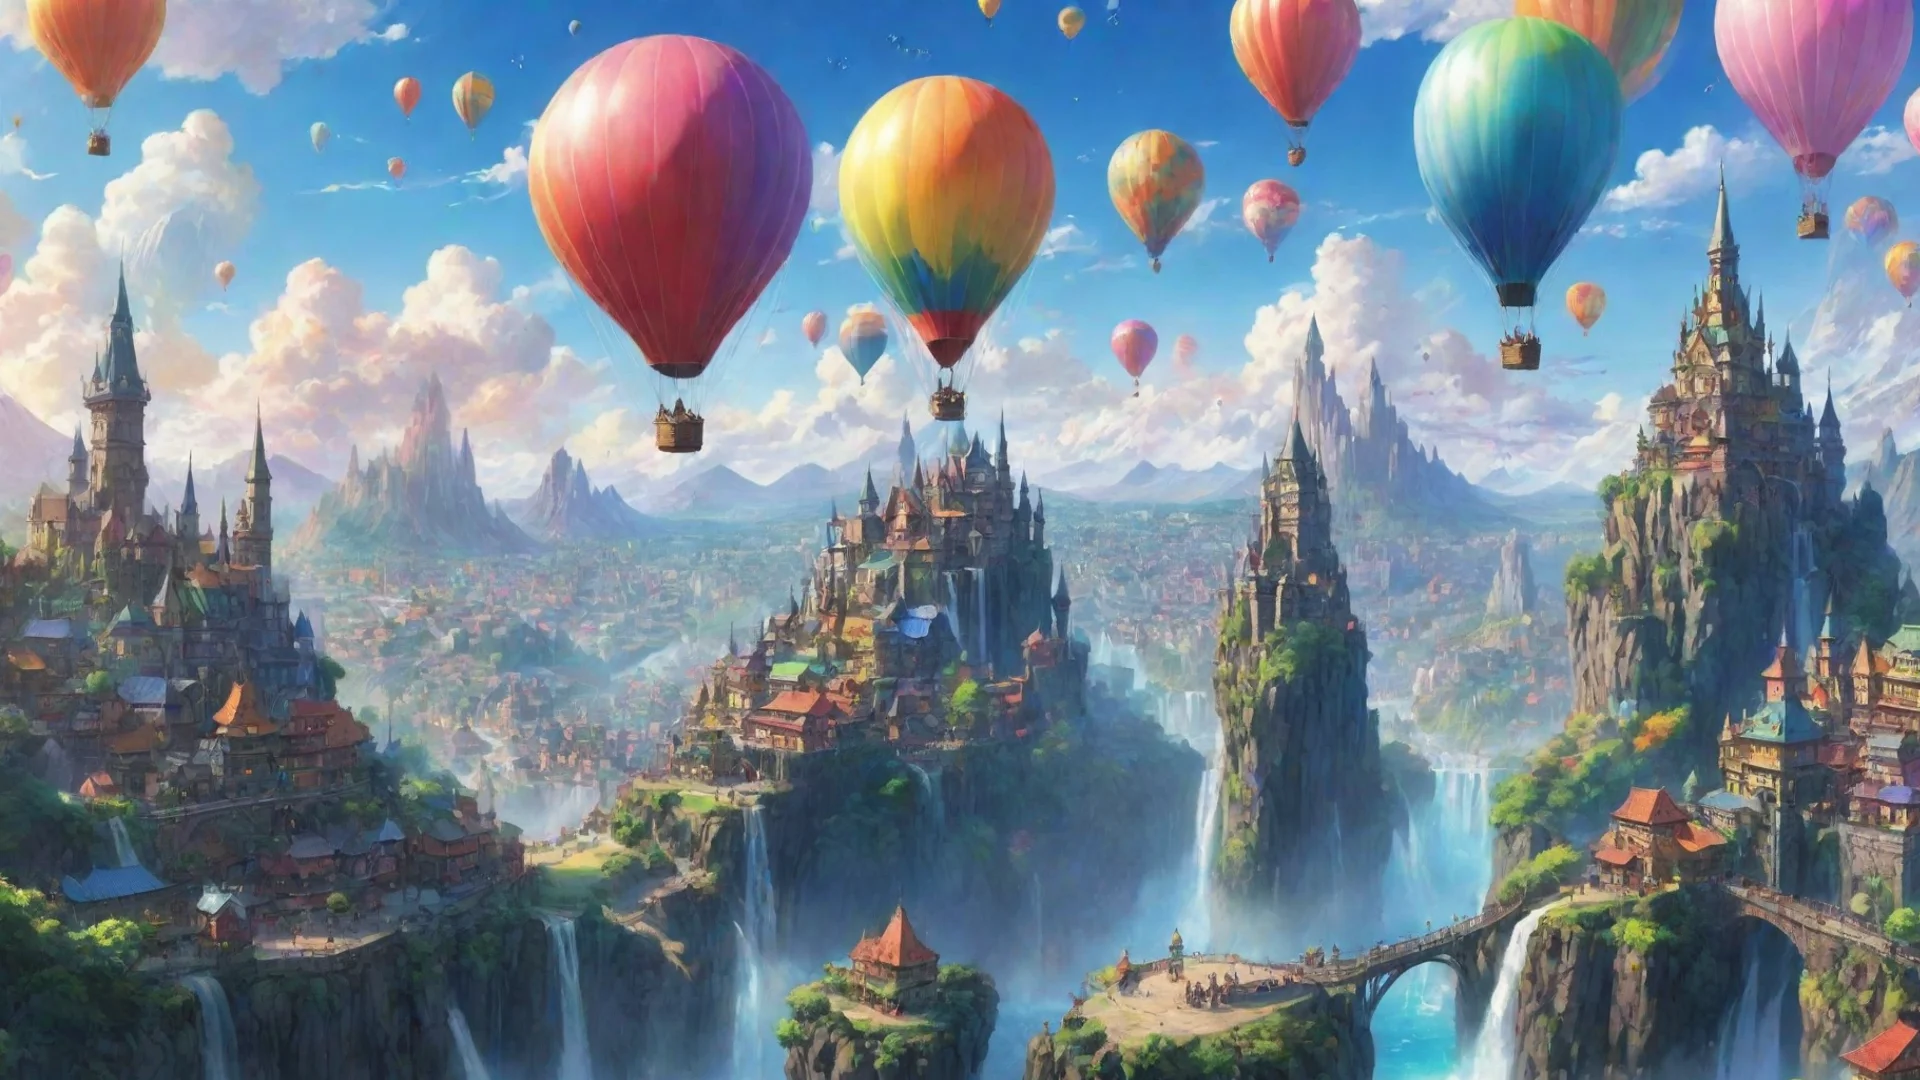 artstation art fantasy anime ghibli world city with flying colorful hot air baloons cities waterfalls crystals rainbows planets ins sky extreme color lovely color contrast amazing confident engaging